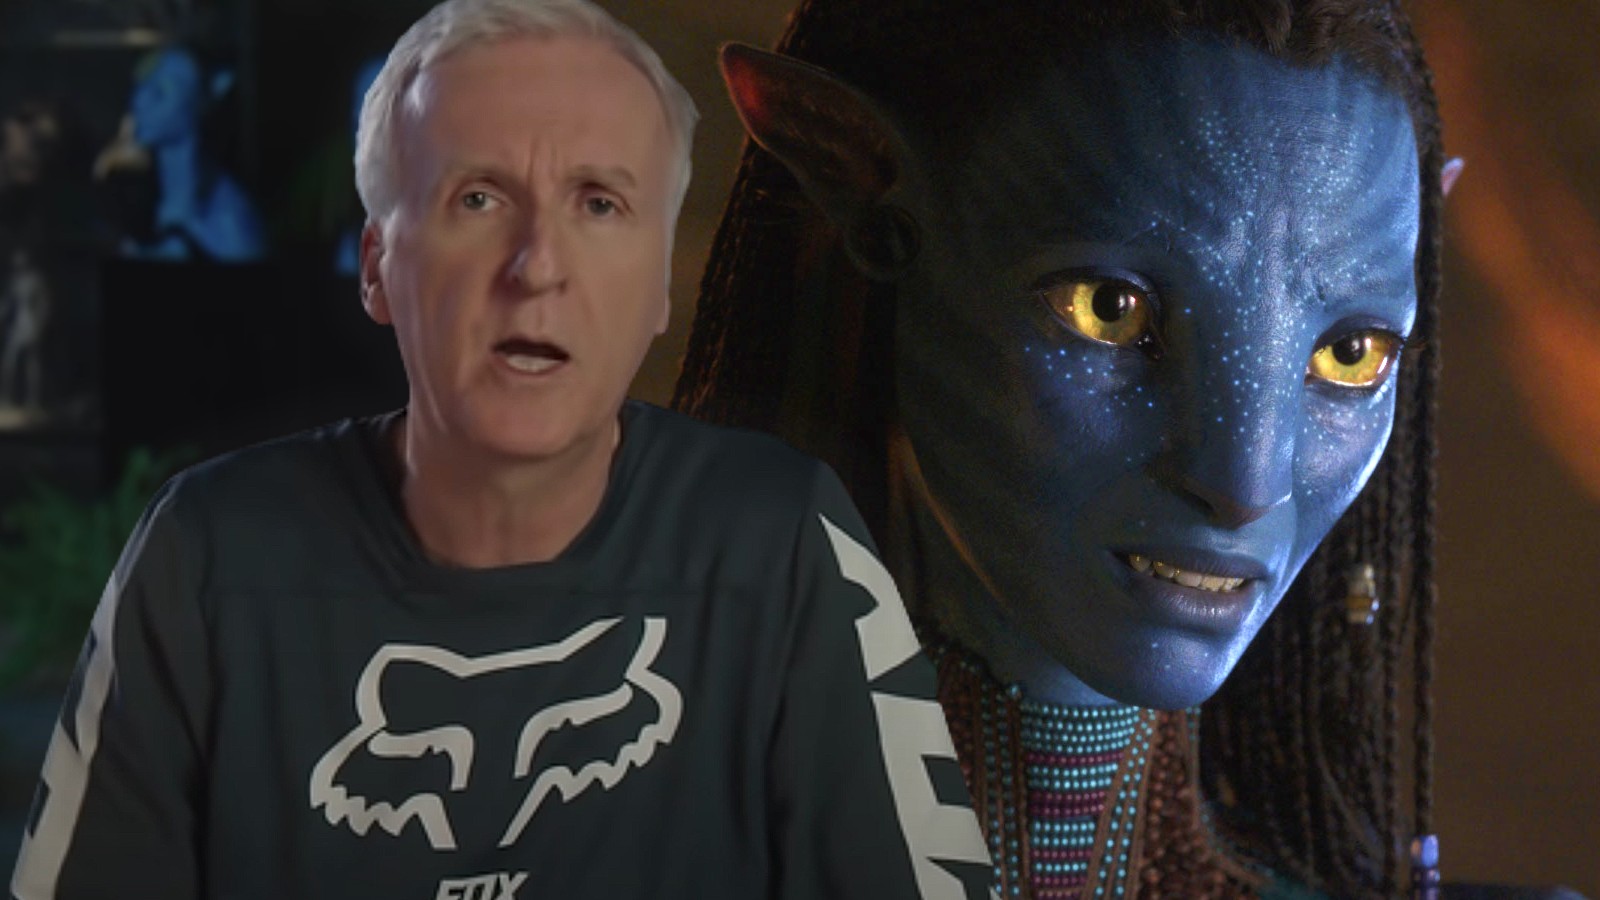 Forget Avatar 2 – James Cameron is already planning Avatar 6 and 7